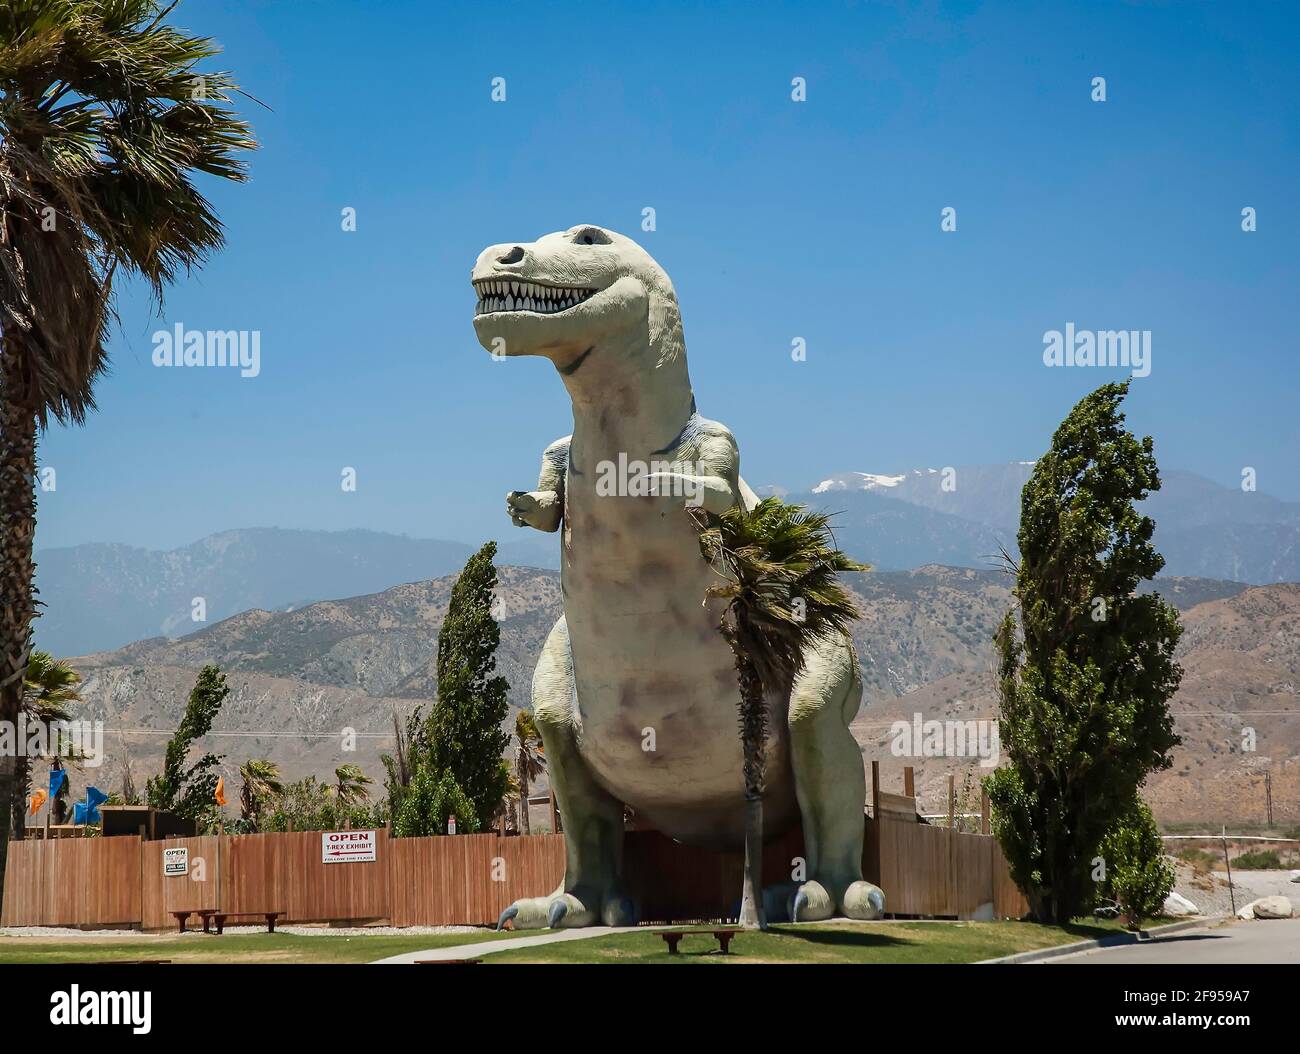 Cabazon, CA, USA: June 18th, 2010: A 65-foot-tall Tyrannosaurus rex known as Mr. Rex is part of a roadside attraction that stands near the freeway in Stock Photo